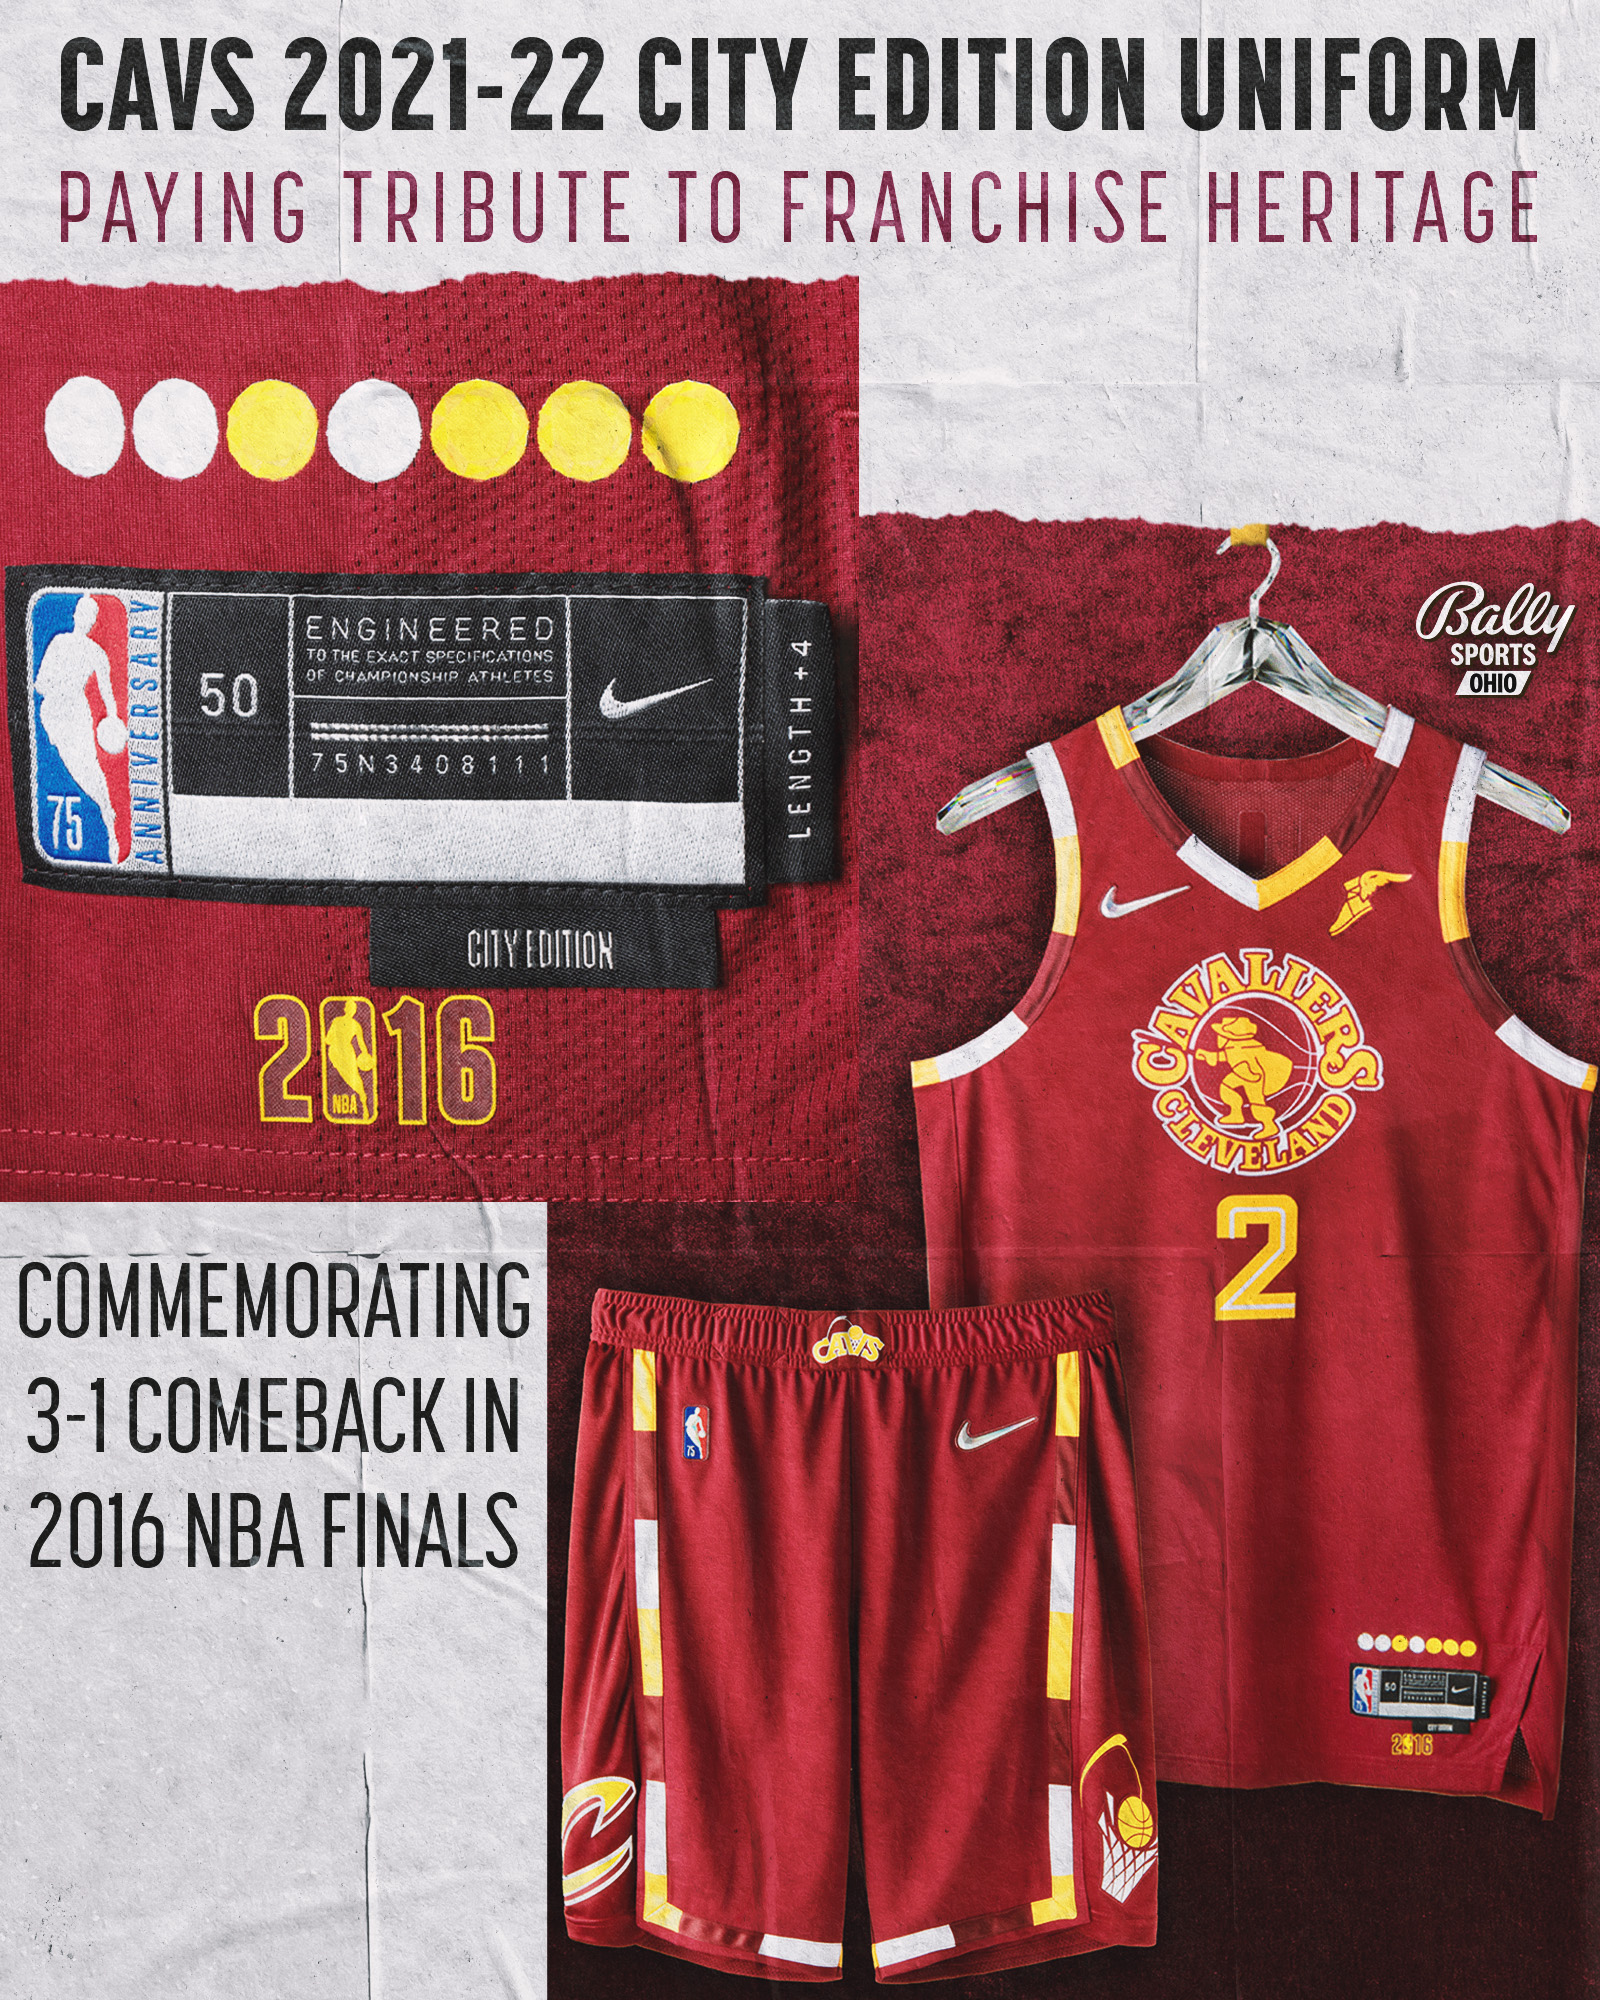 Cleveland Cavaliers City Edition Uniform: a tribute to